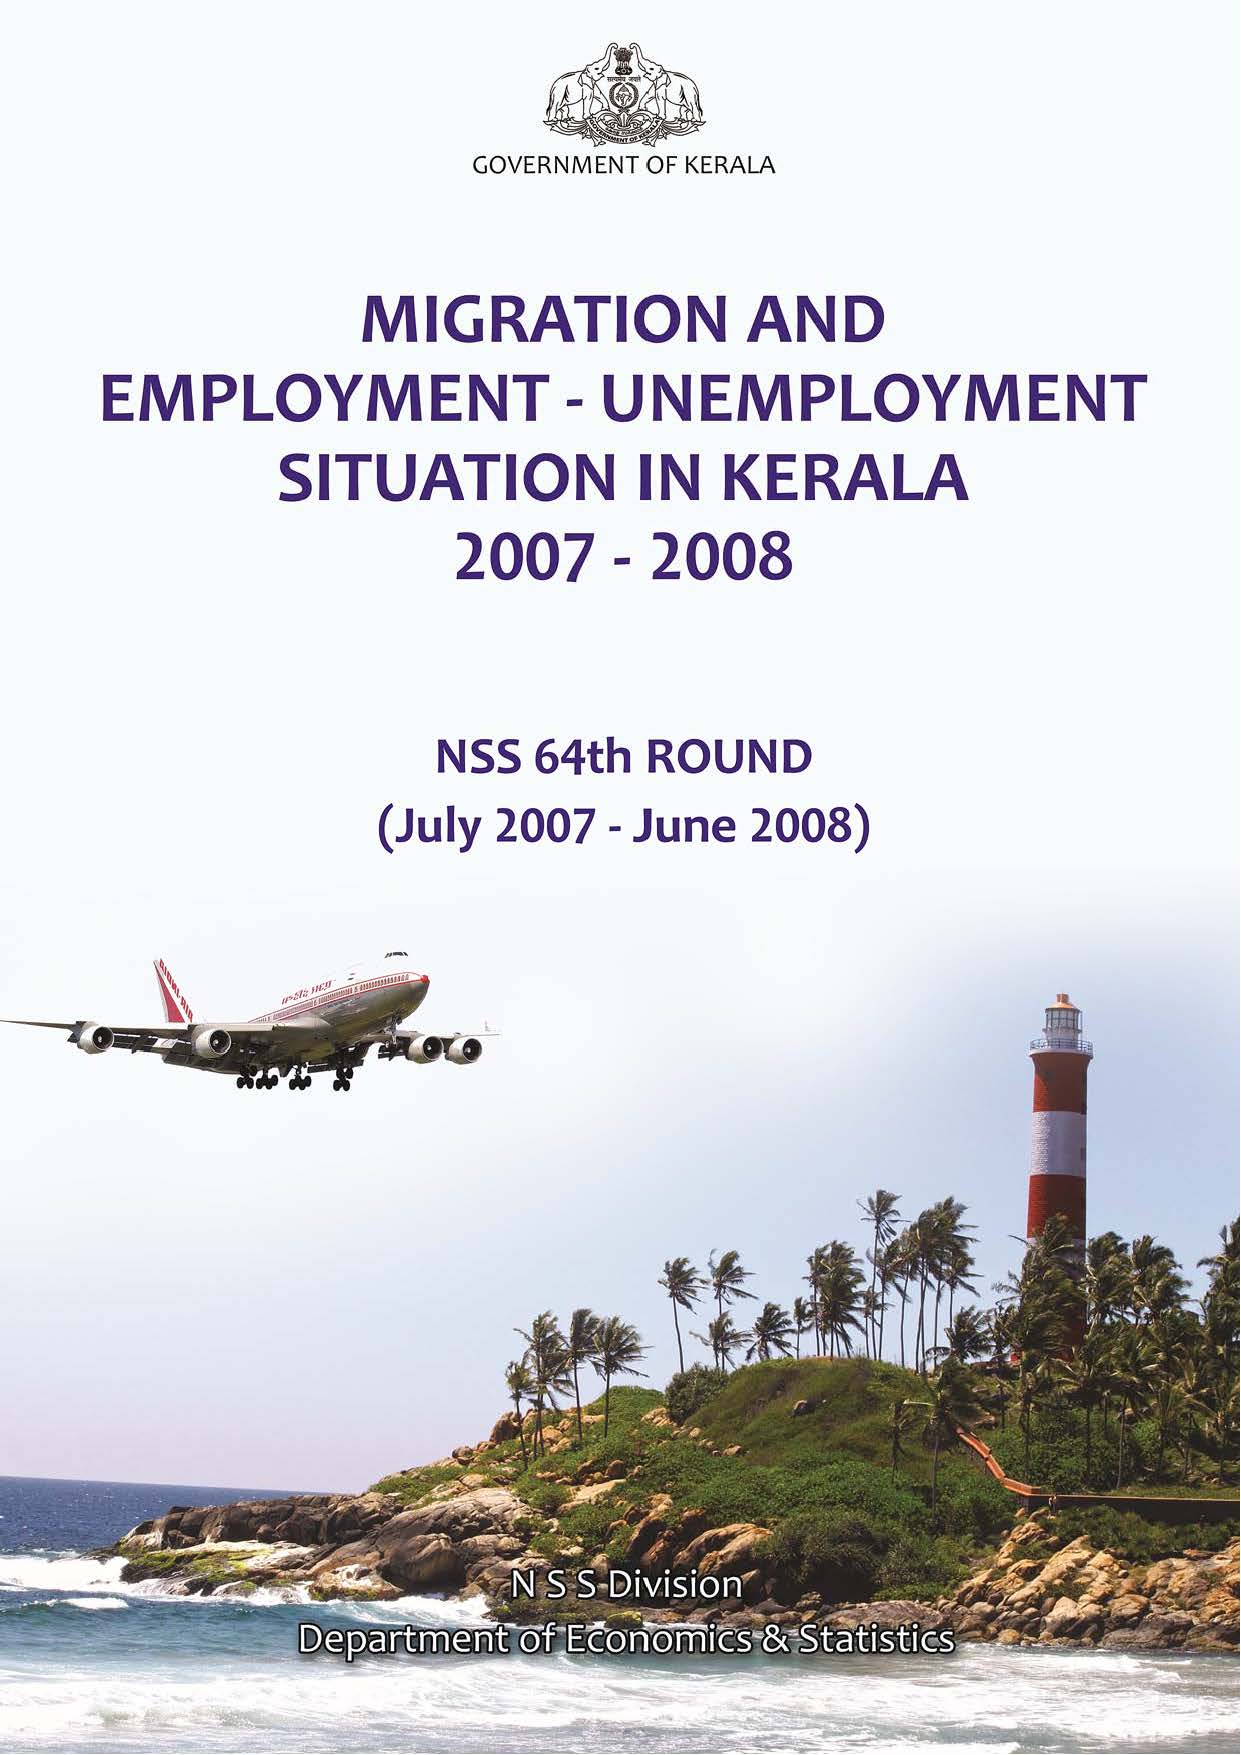 NSS 64th round- Migration and Employment - Unemployment Situation in Kerala